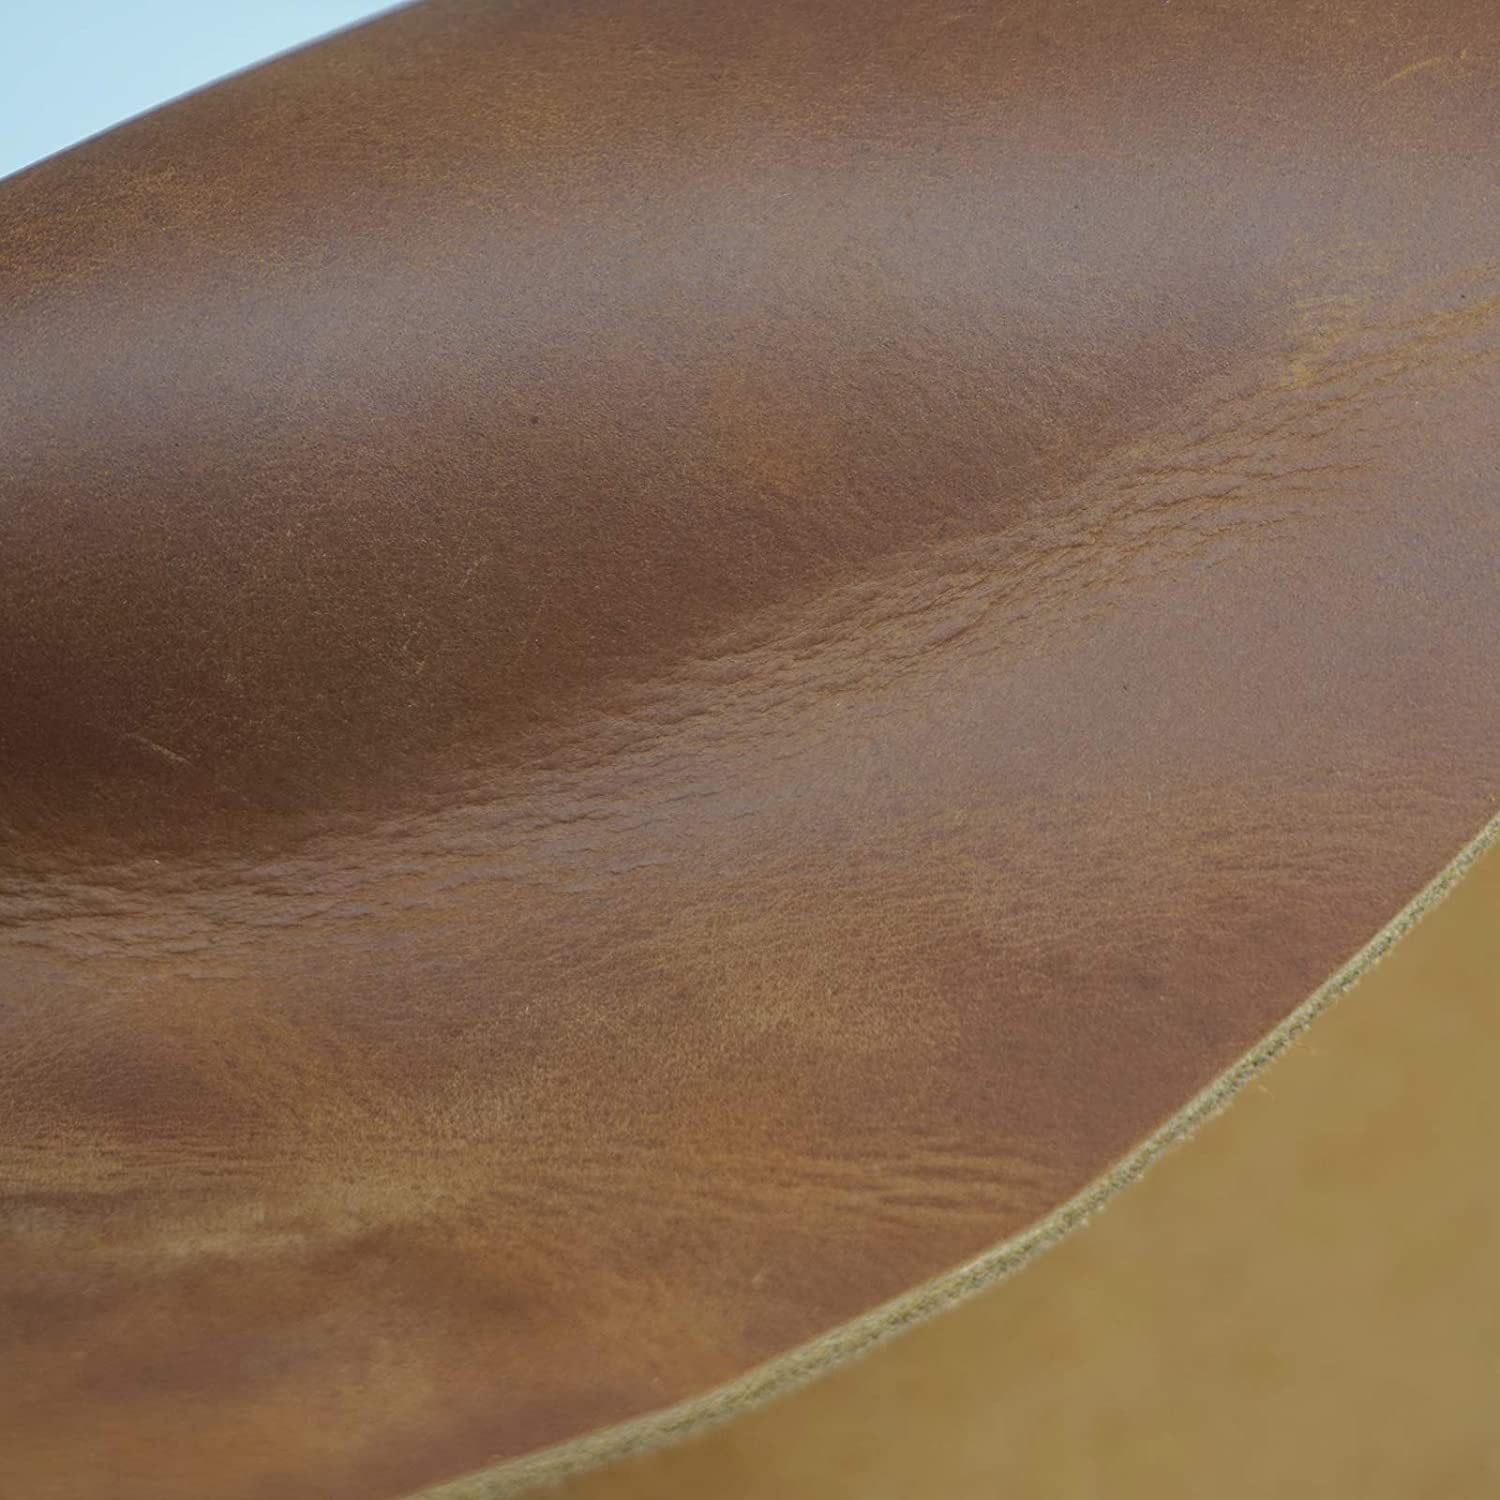 5mm Thick Genuine Leather Fabric Vintage Cowhide Vegetable Tanned Leather  Crafts Real Cow Hide Tan Full Grain Pieces Strip leather sheets for crafts